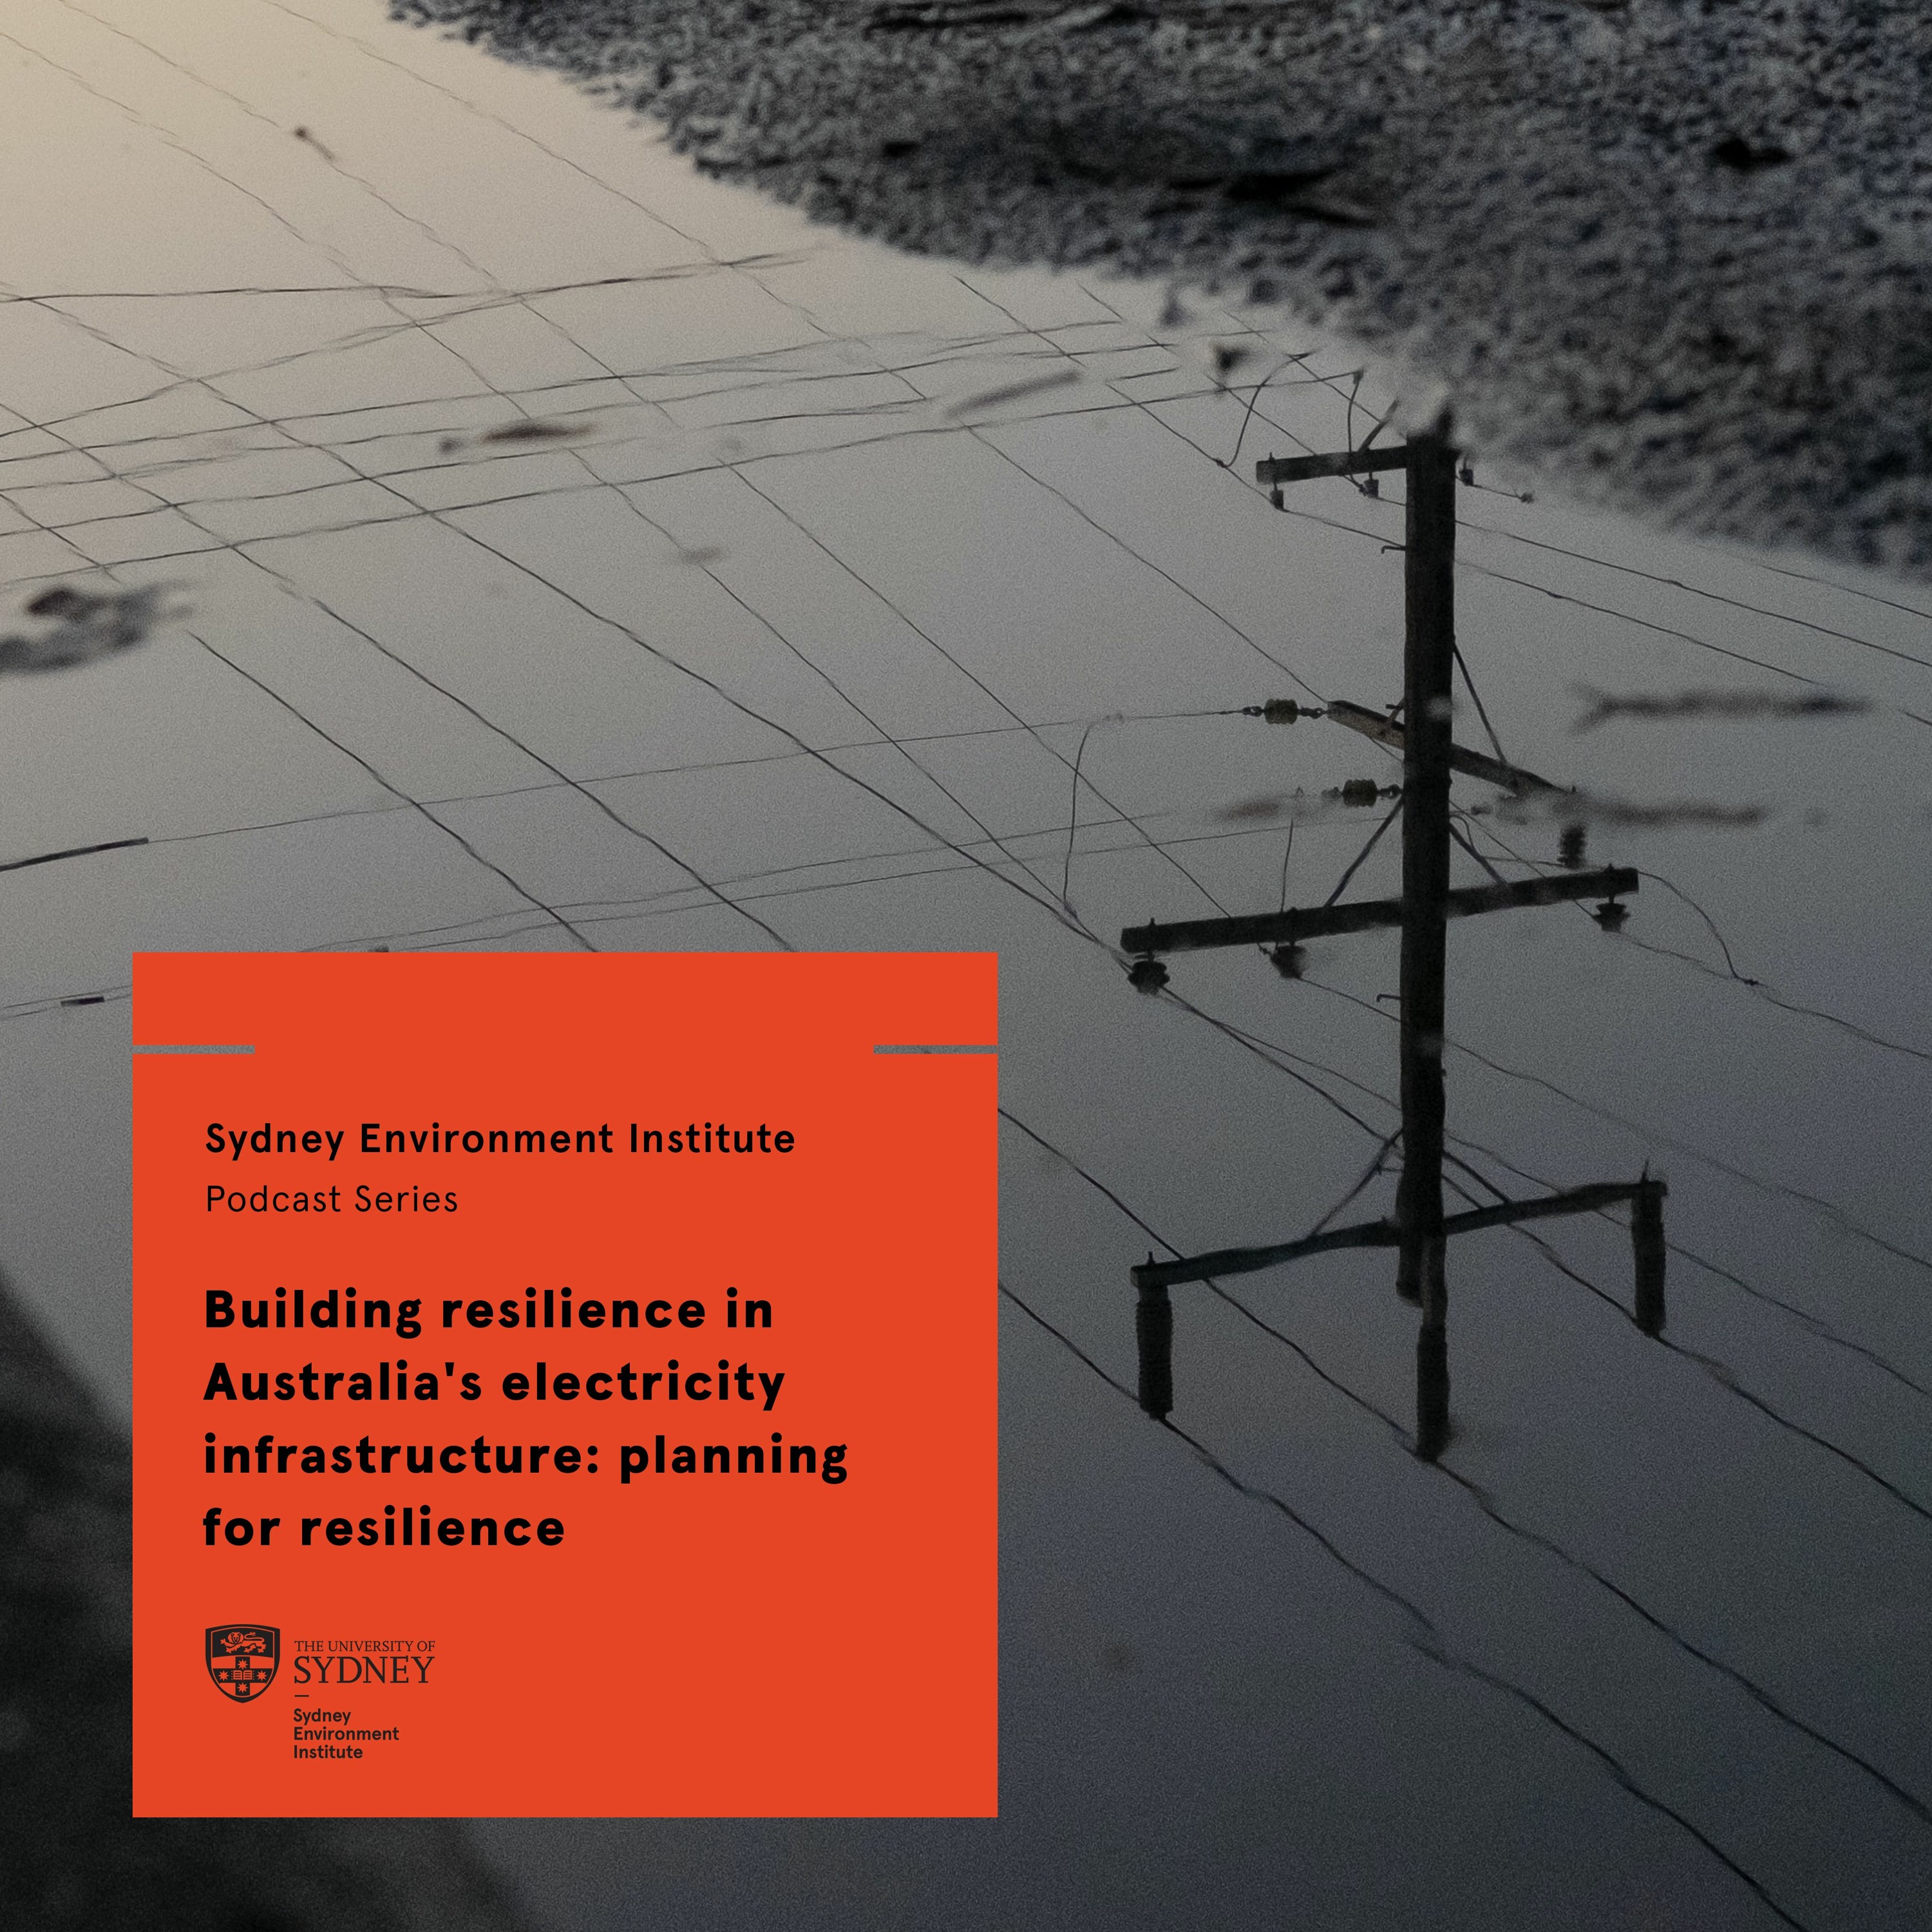 Building resilience in Australia's electricity infrastructure: planning for resilience